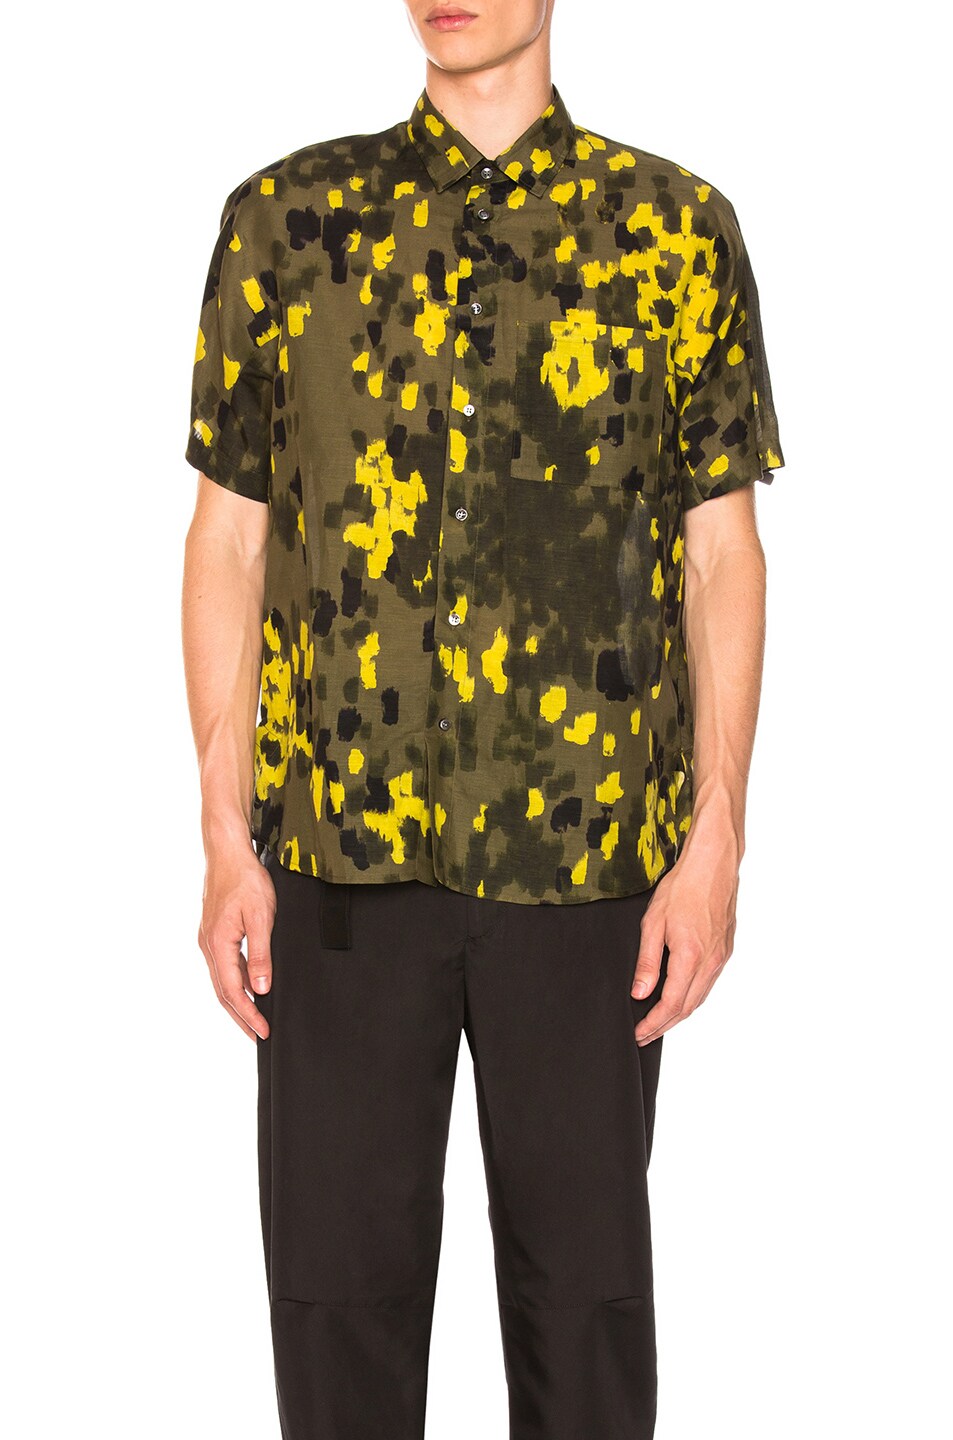 Image 1 of OAMC Pulse Shirt in Military Green Camo Print